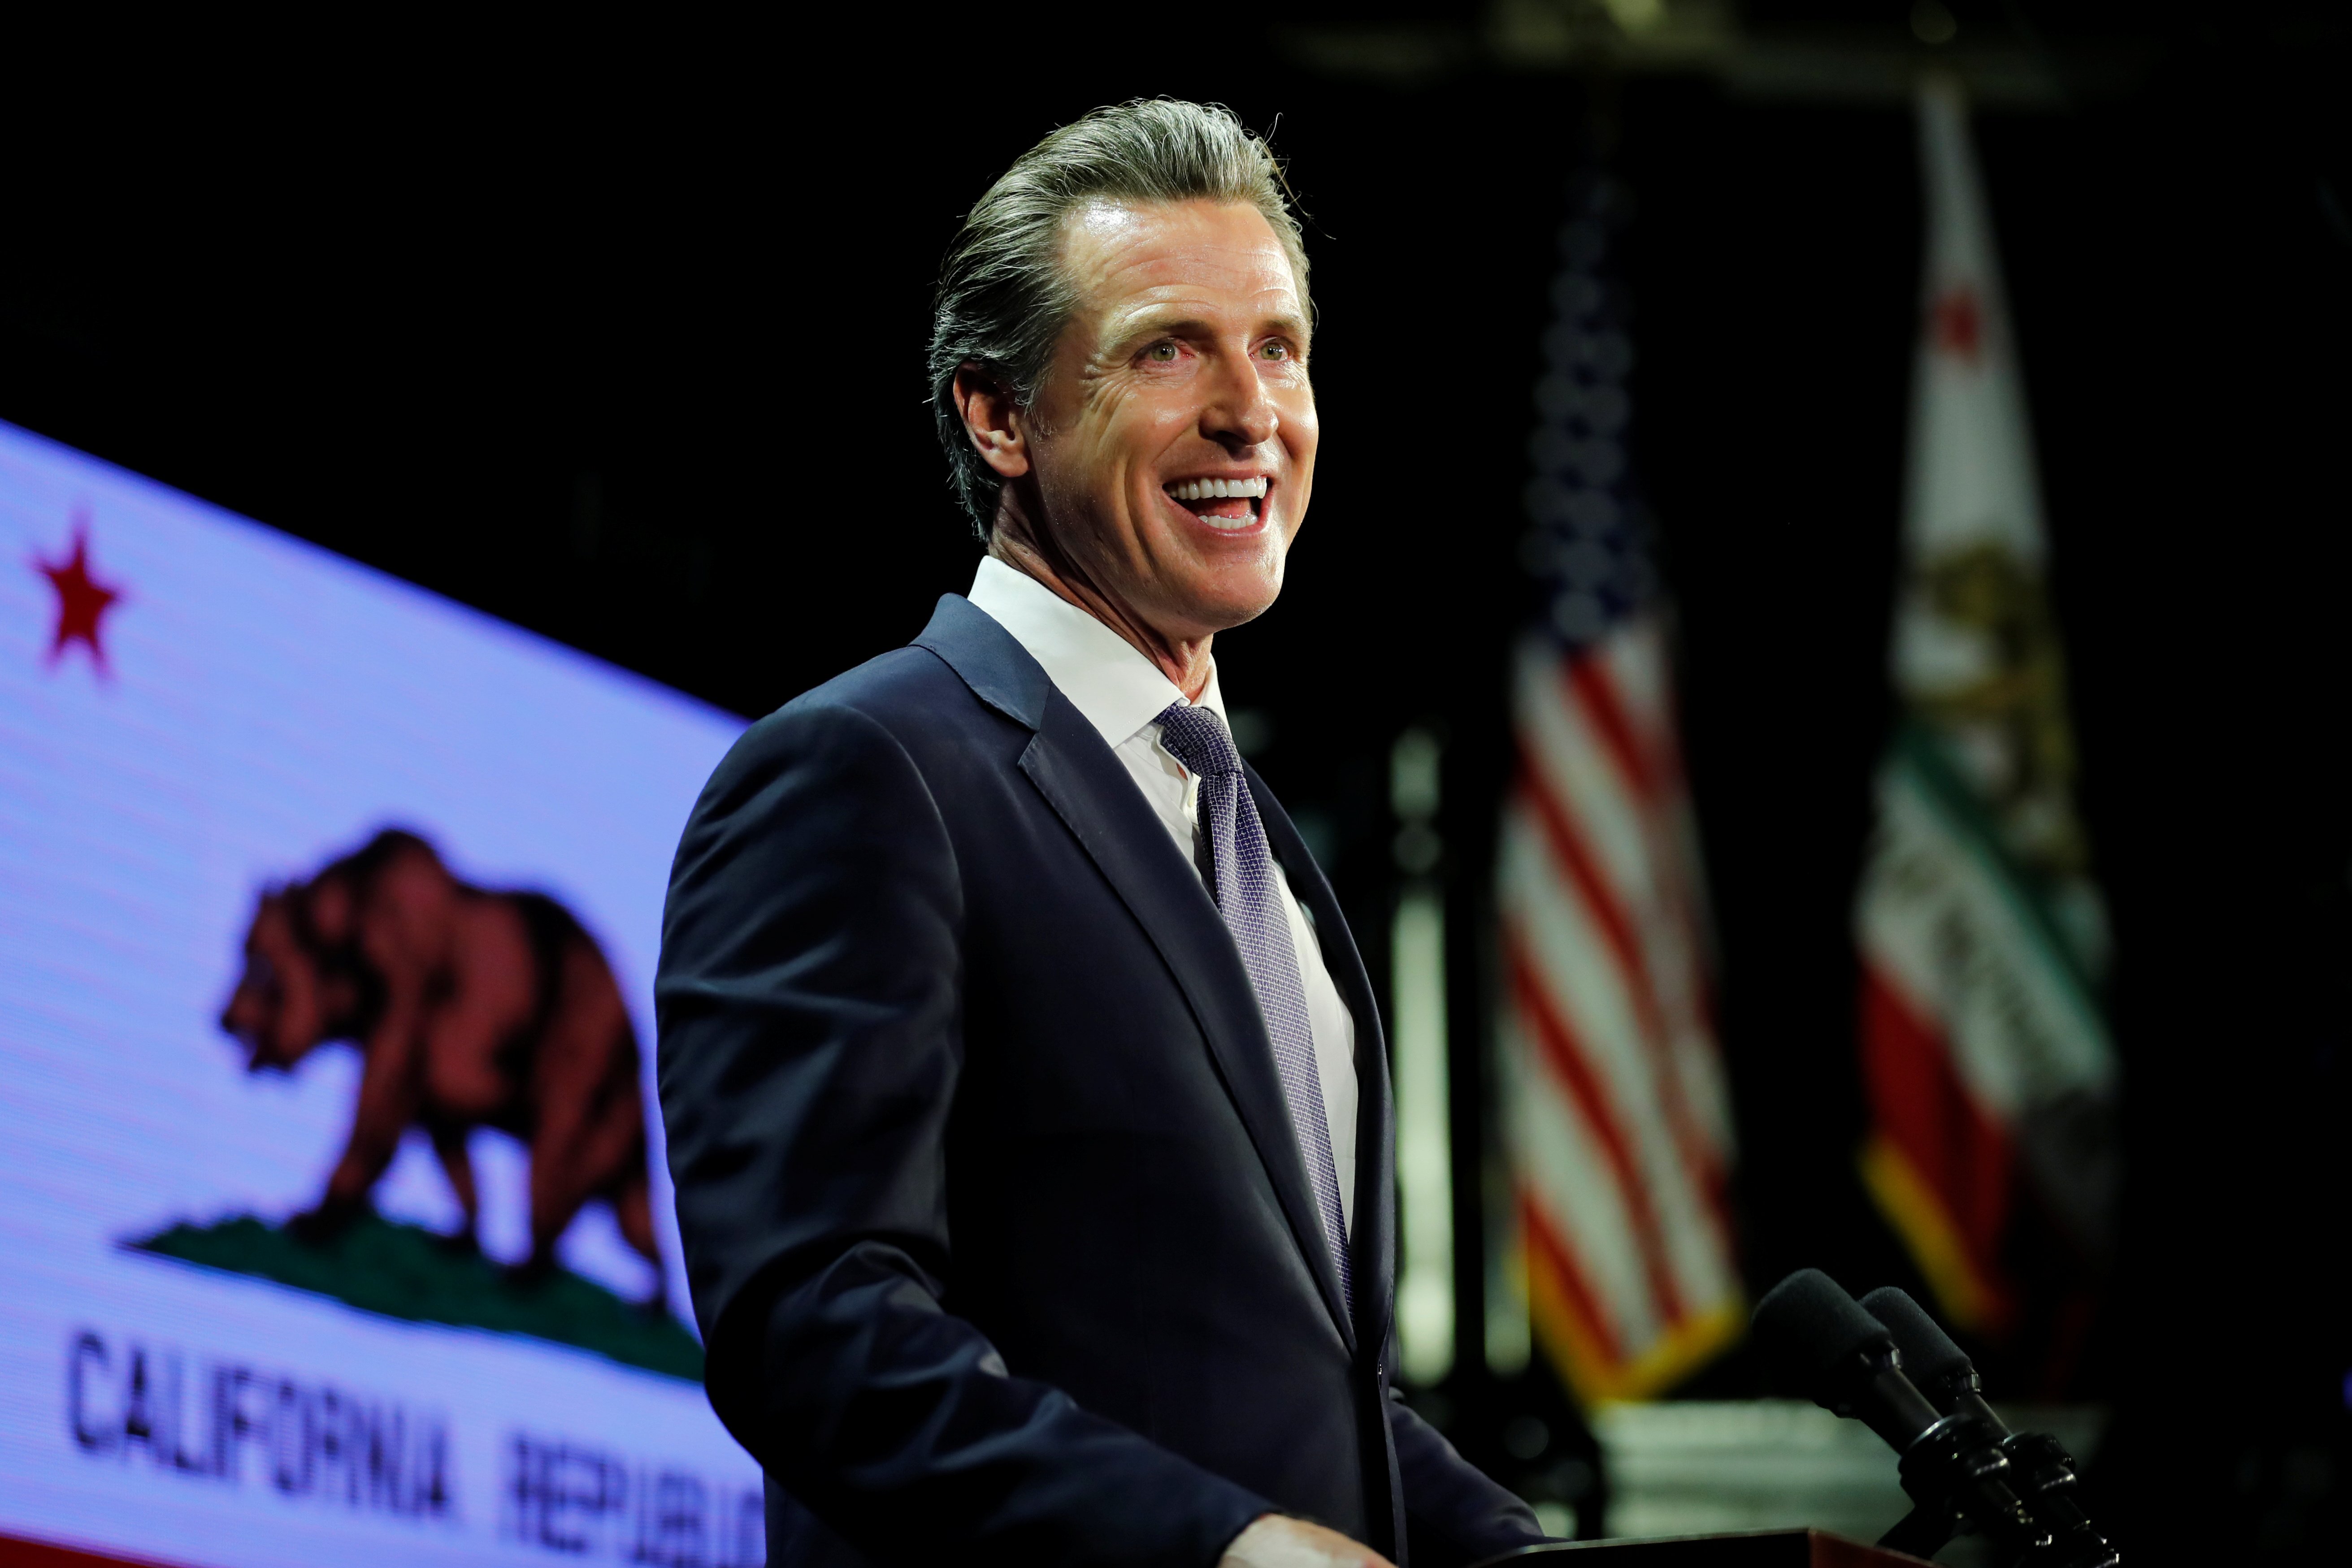 California Democratic gubernatorial candidate Gavin Newsom speaks after being elected governor of the state during an election night party in Los Angeles, California, U.S. November 6, 2018. REUTERS/Mike Blake